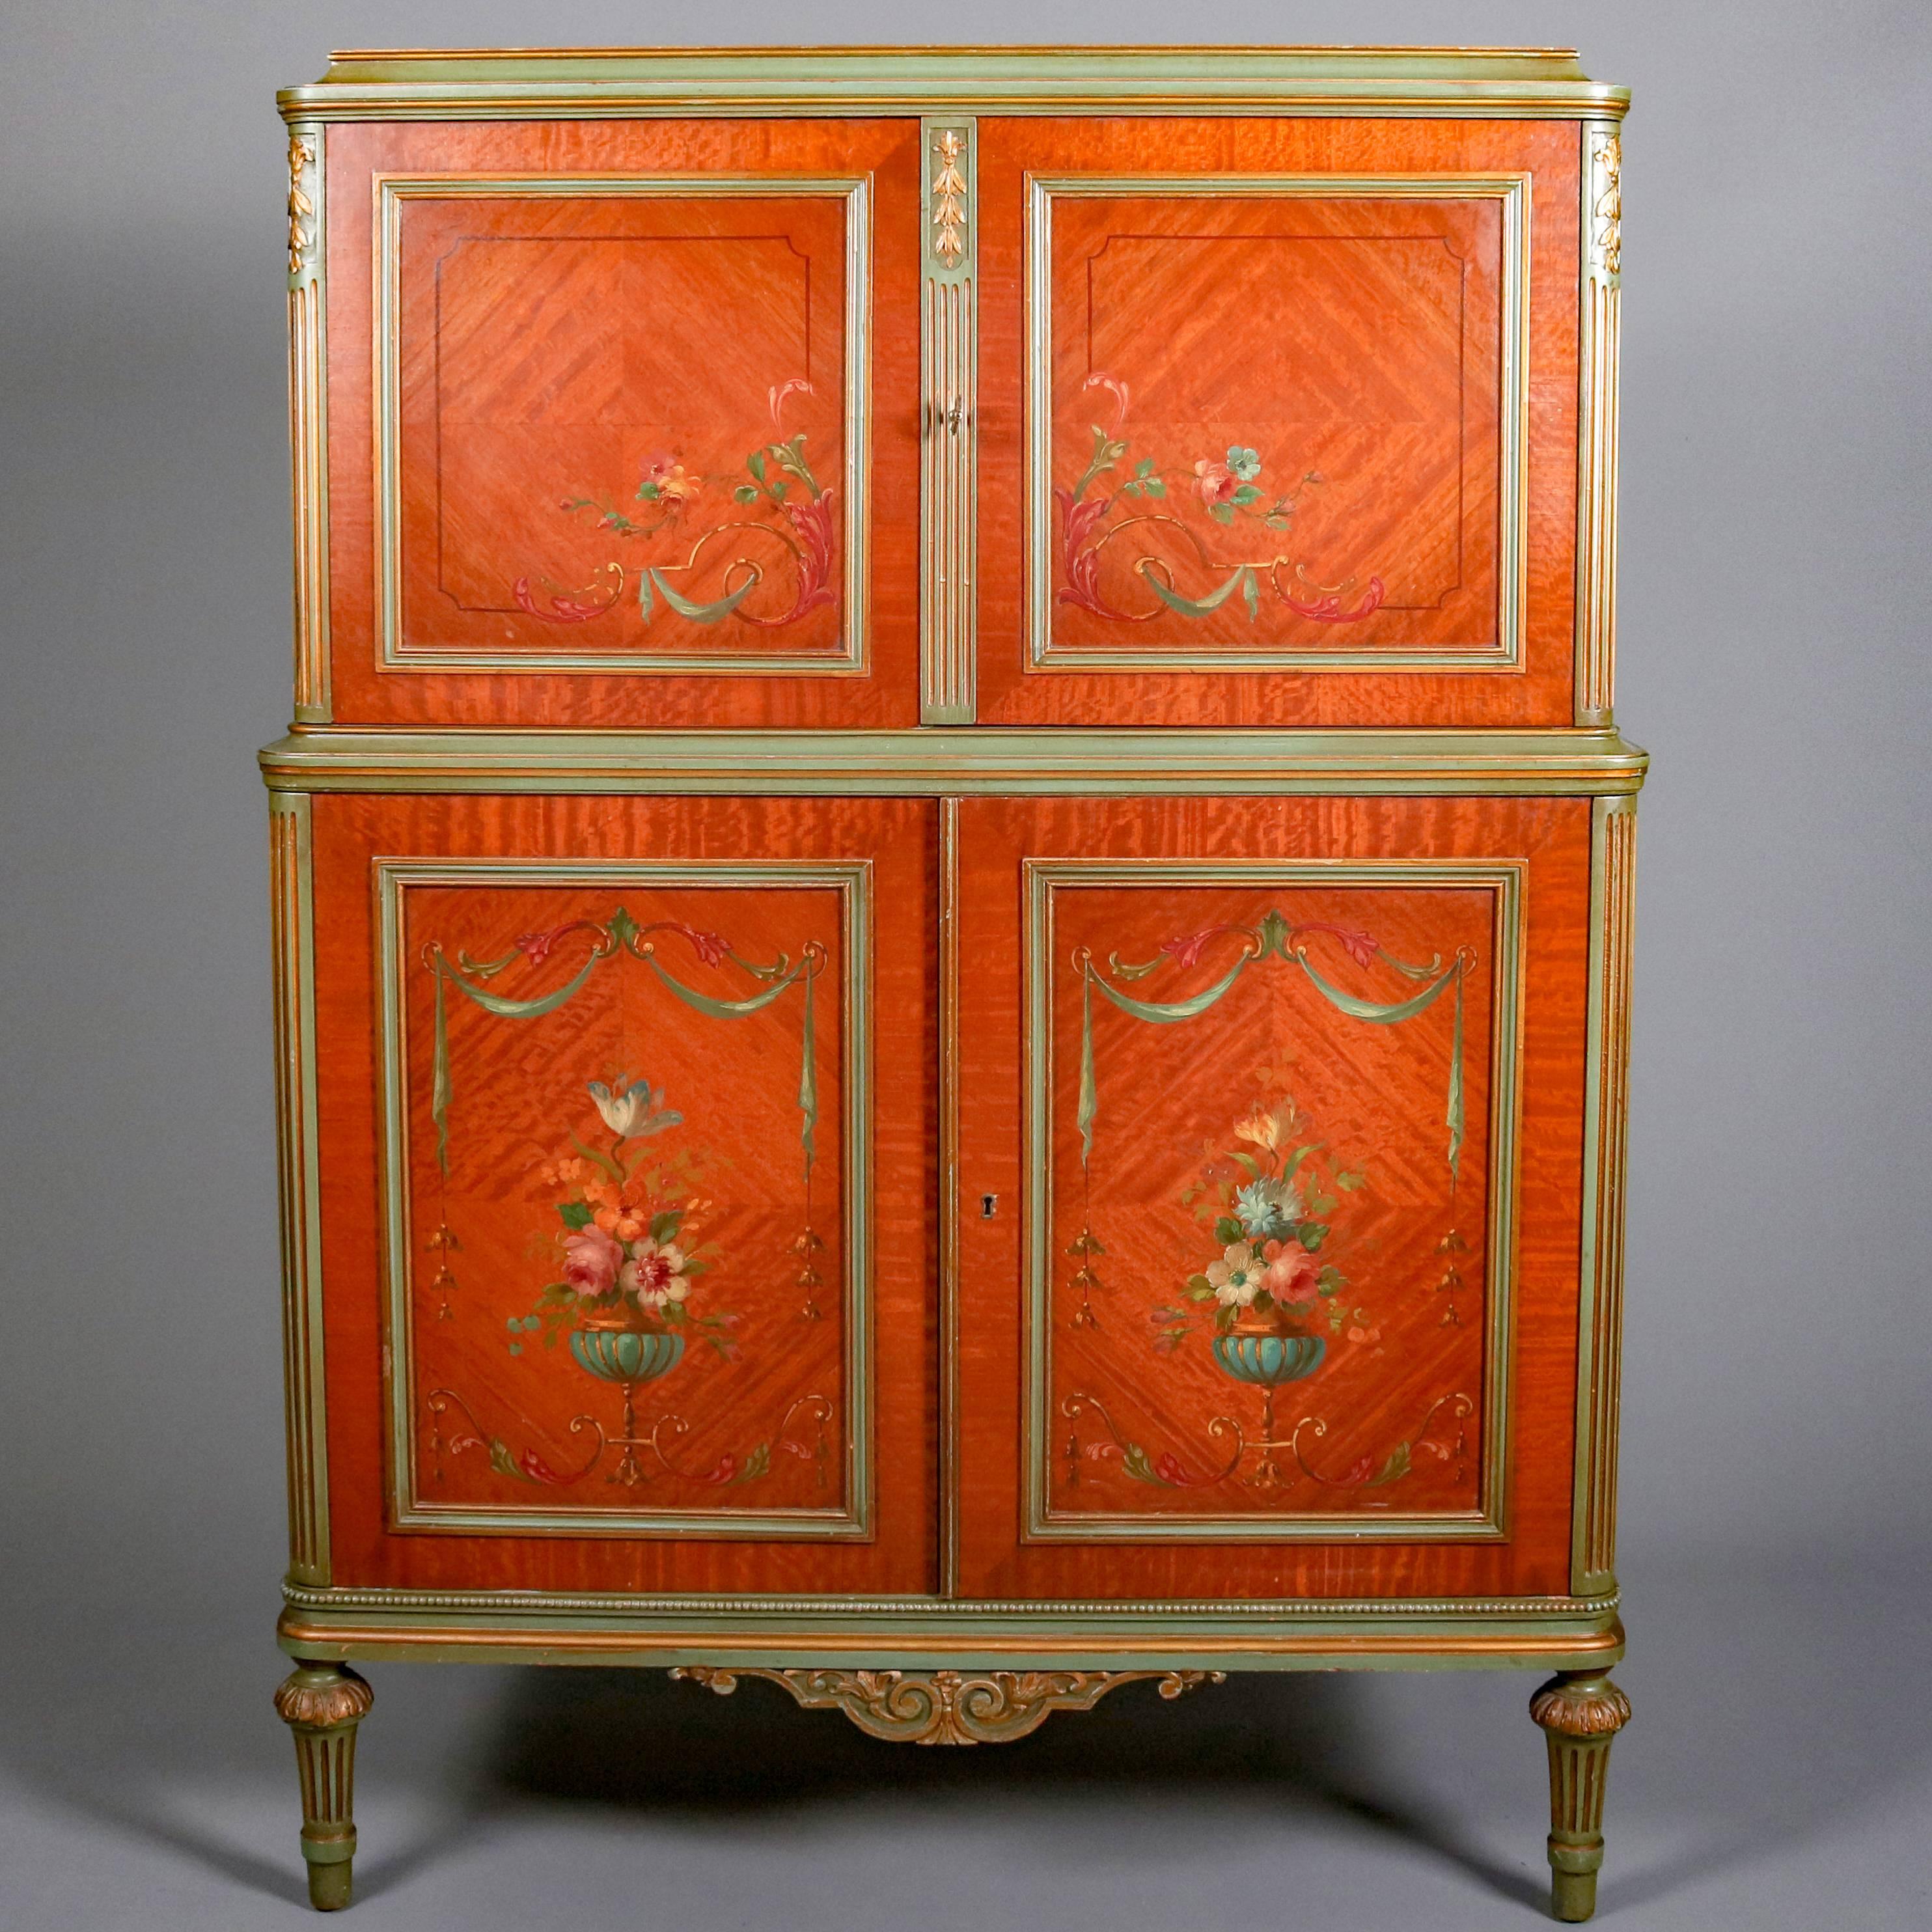 Antique Adam style neoclassical satinwood high chest feature bookmatched panel doors with hand-painted central floral and urn reserves bordered by foliate, ribbon and scroll garland opening to reveal interior apparel trays, gilt decorated reeded